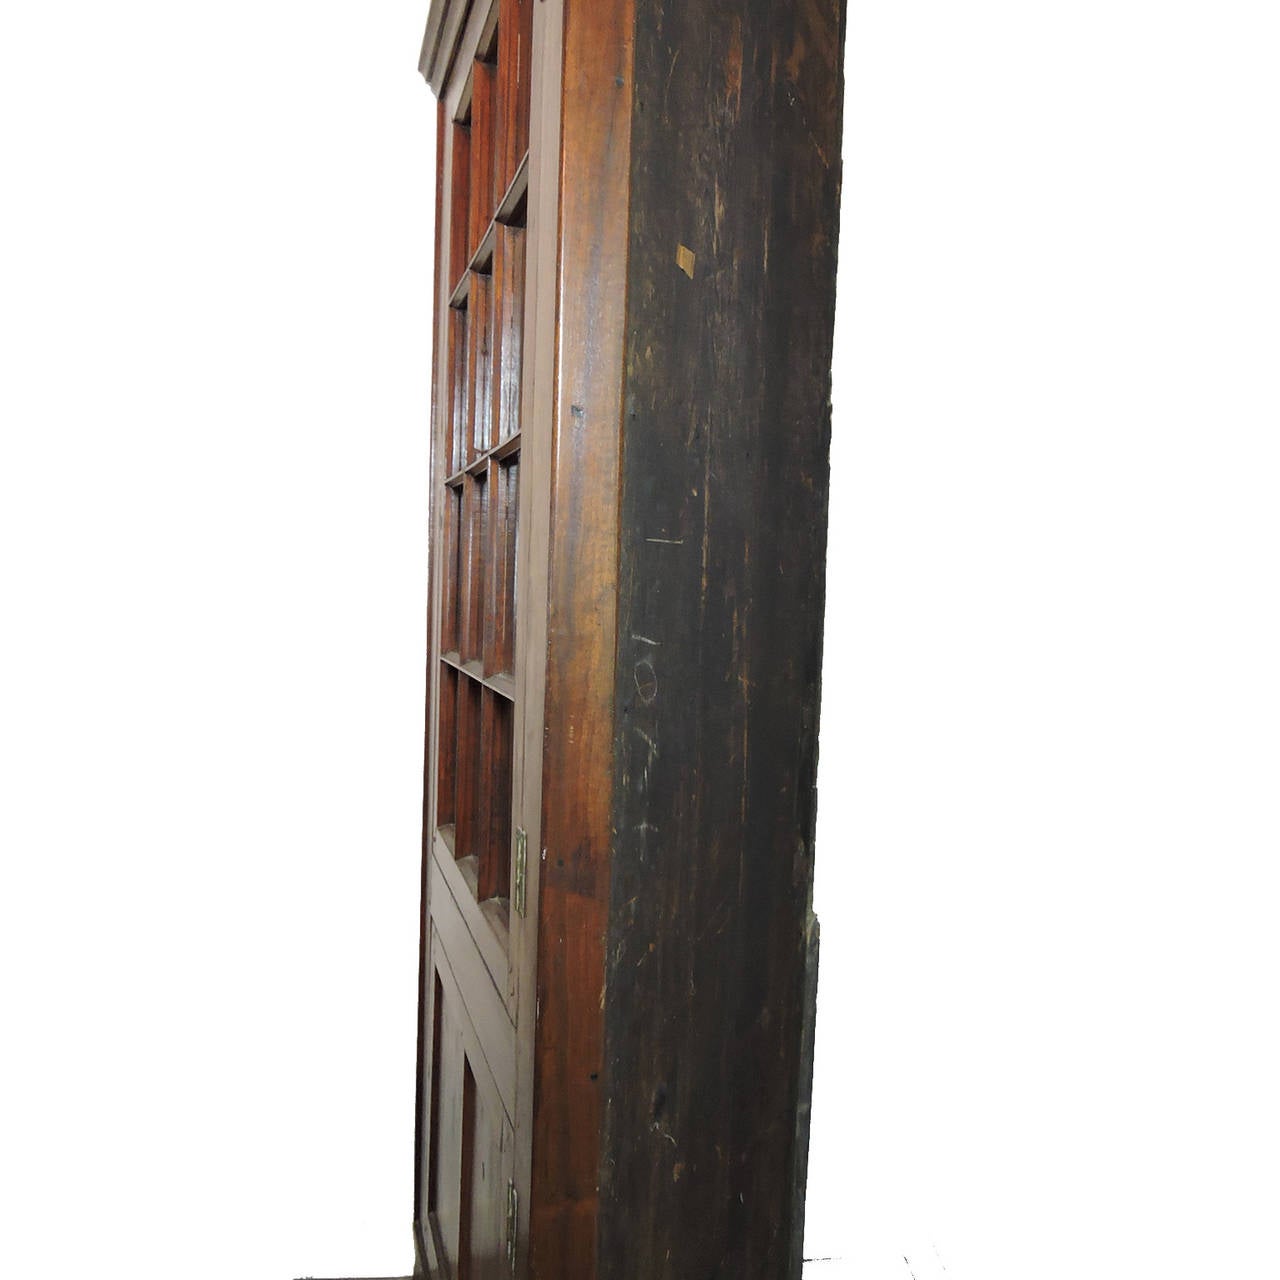 19th Century American Mahogany Corner Cupboard with Great Surface